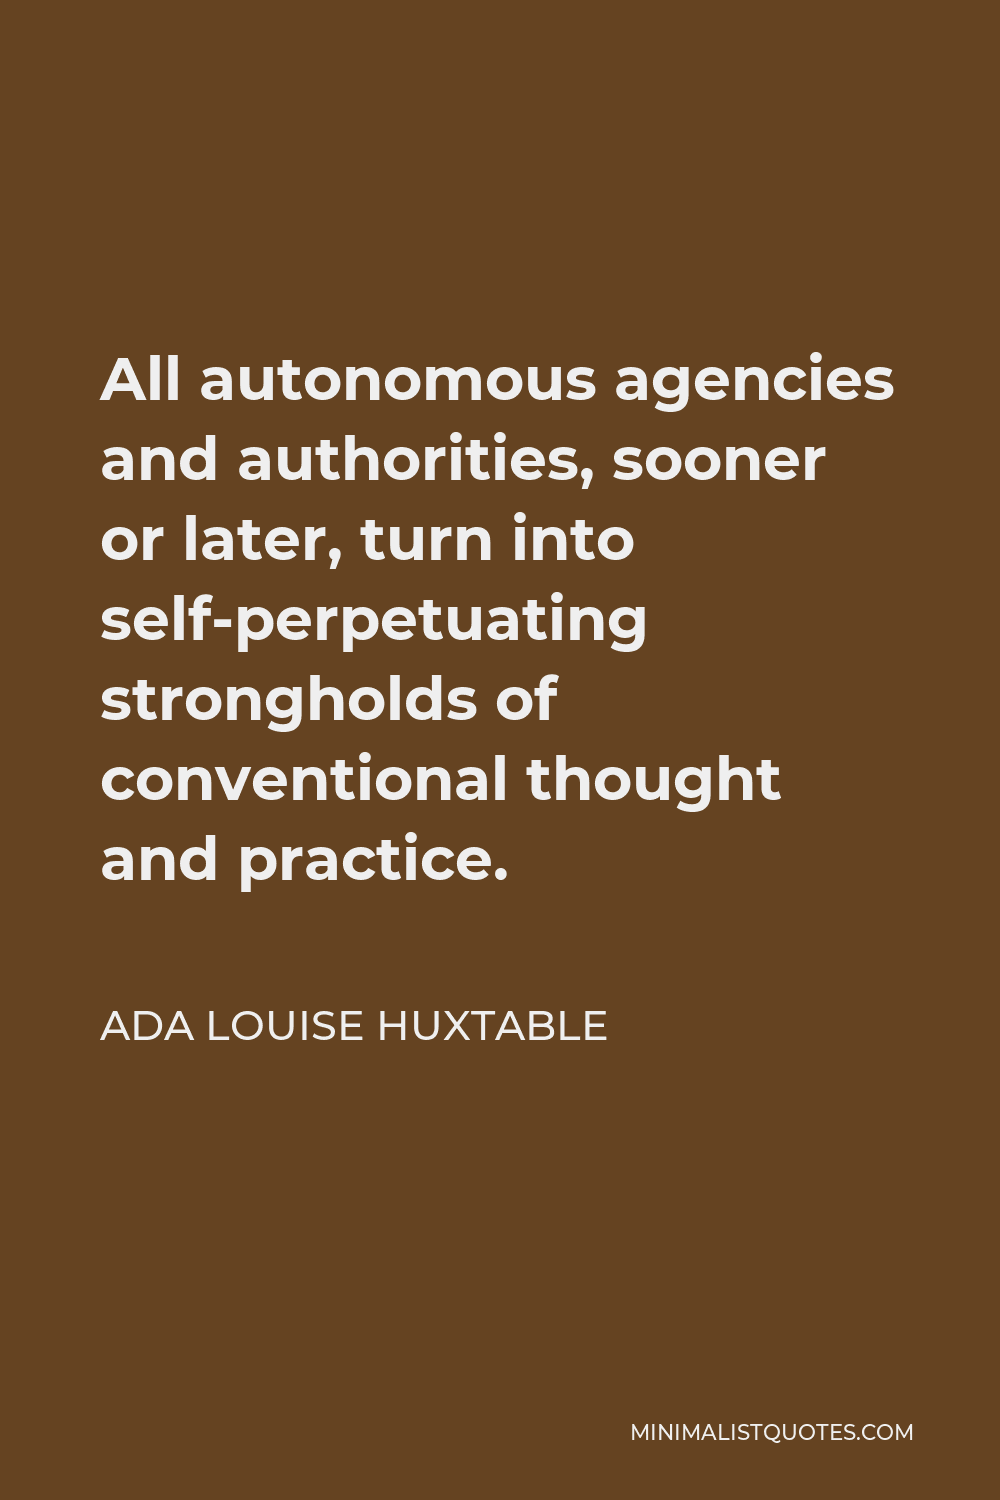 Ada Louise Huxtable Quote - All autonomous agencies and authorities, sooner or later, turn into self-perpetuating strongholds of conventional thought and practice.